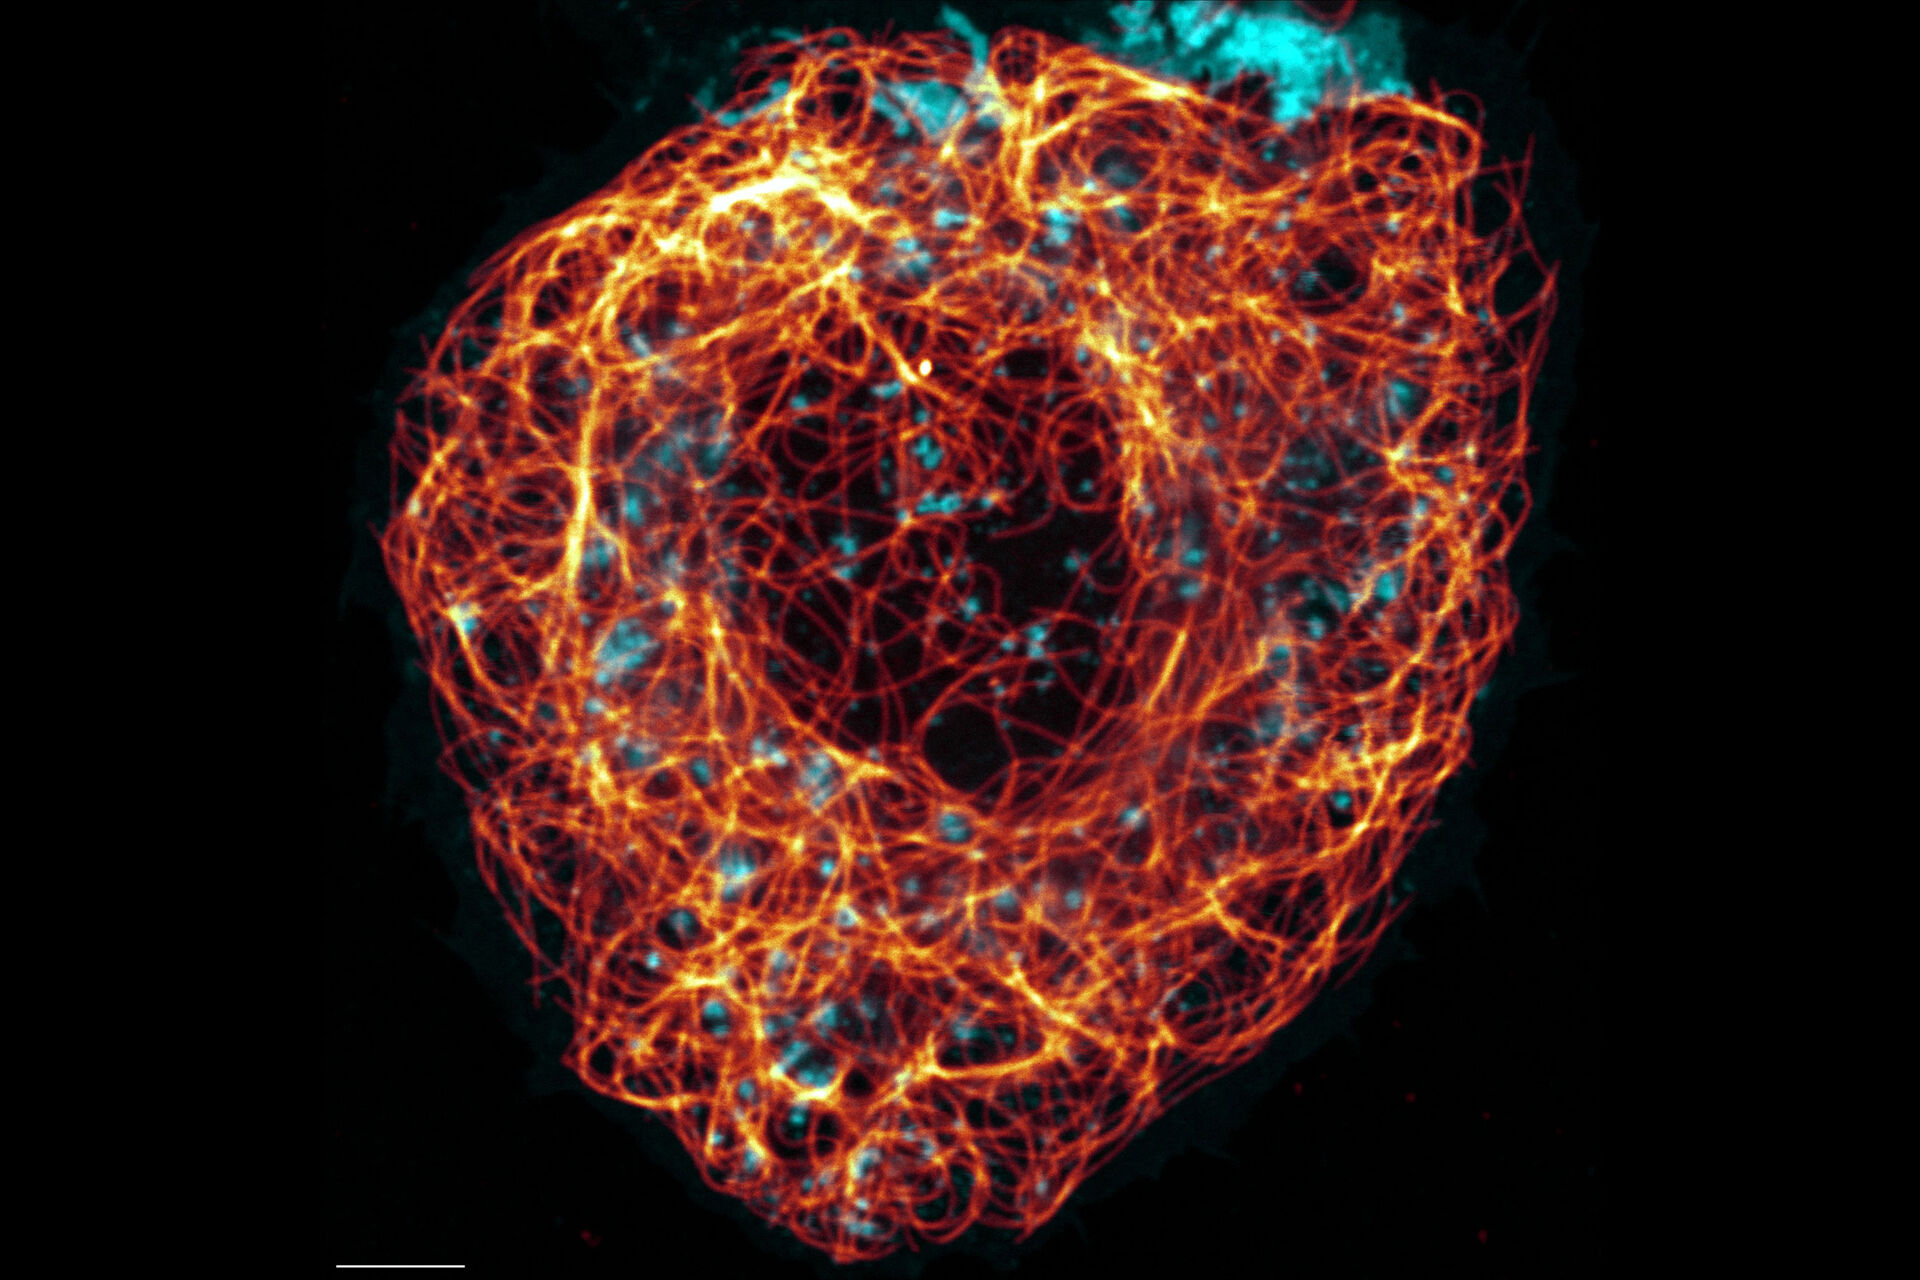 Cytoskeleton and membranes in live cell imaged with TauSTED - Confocal